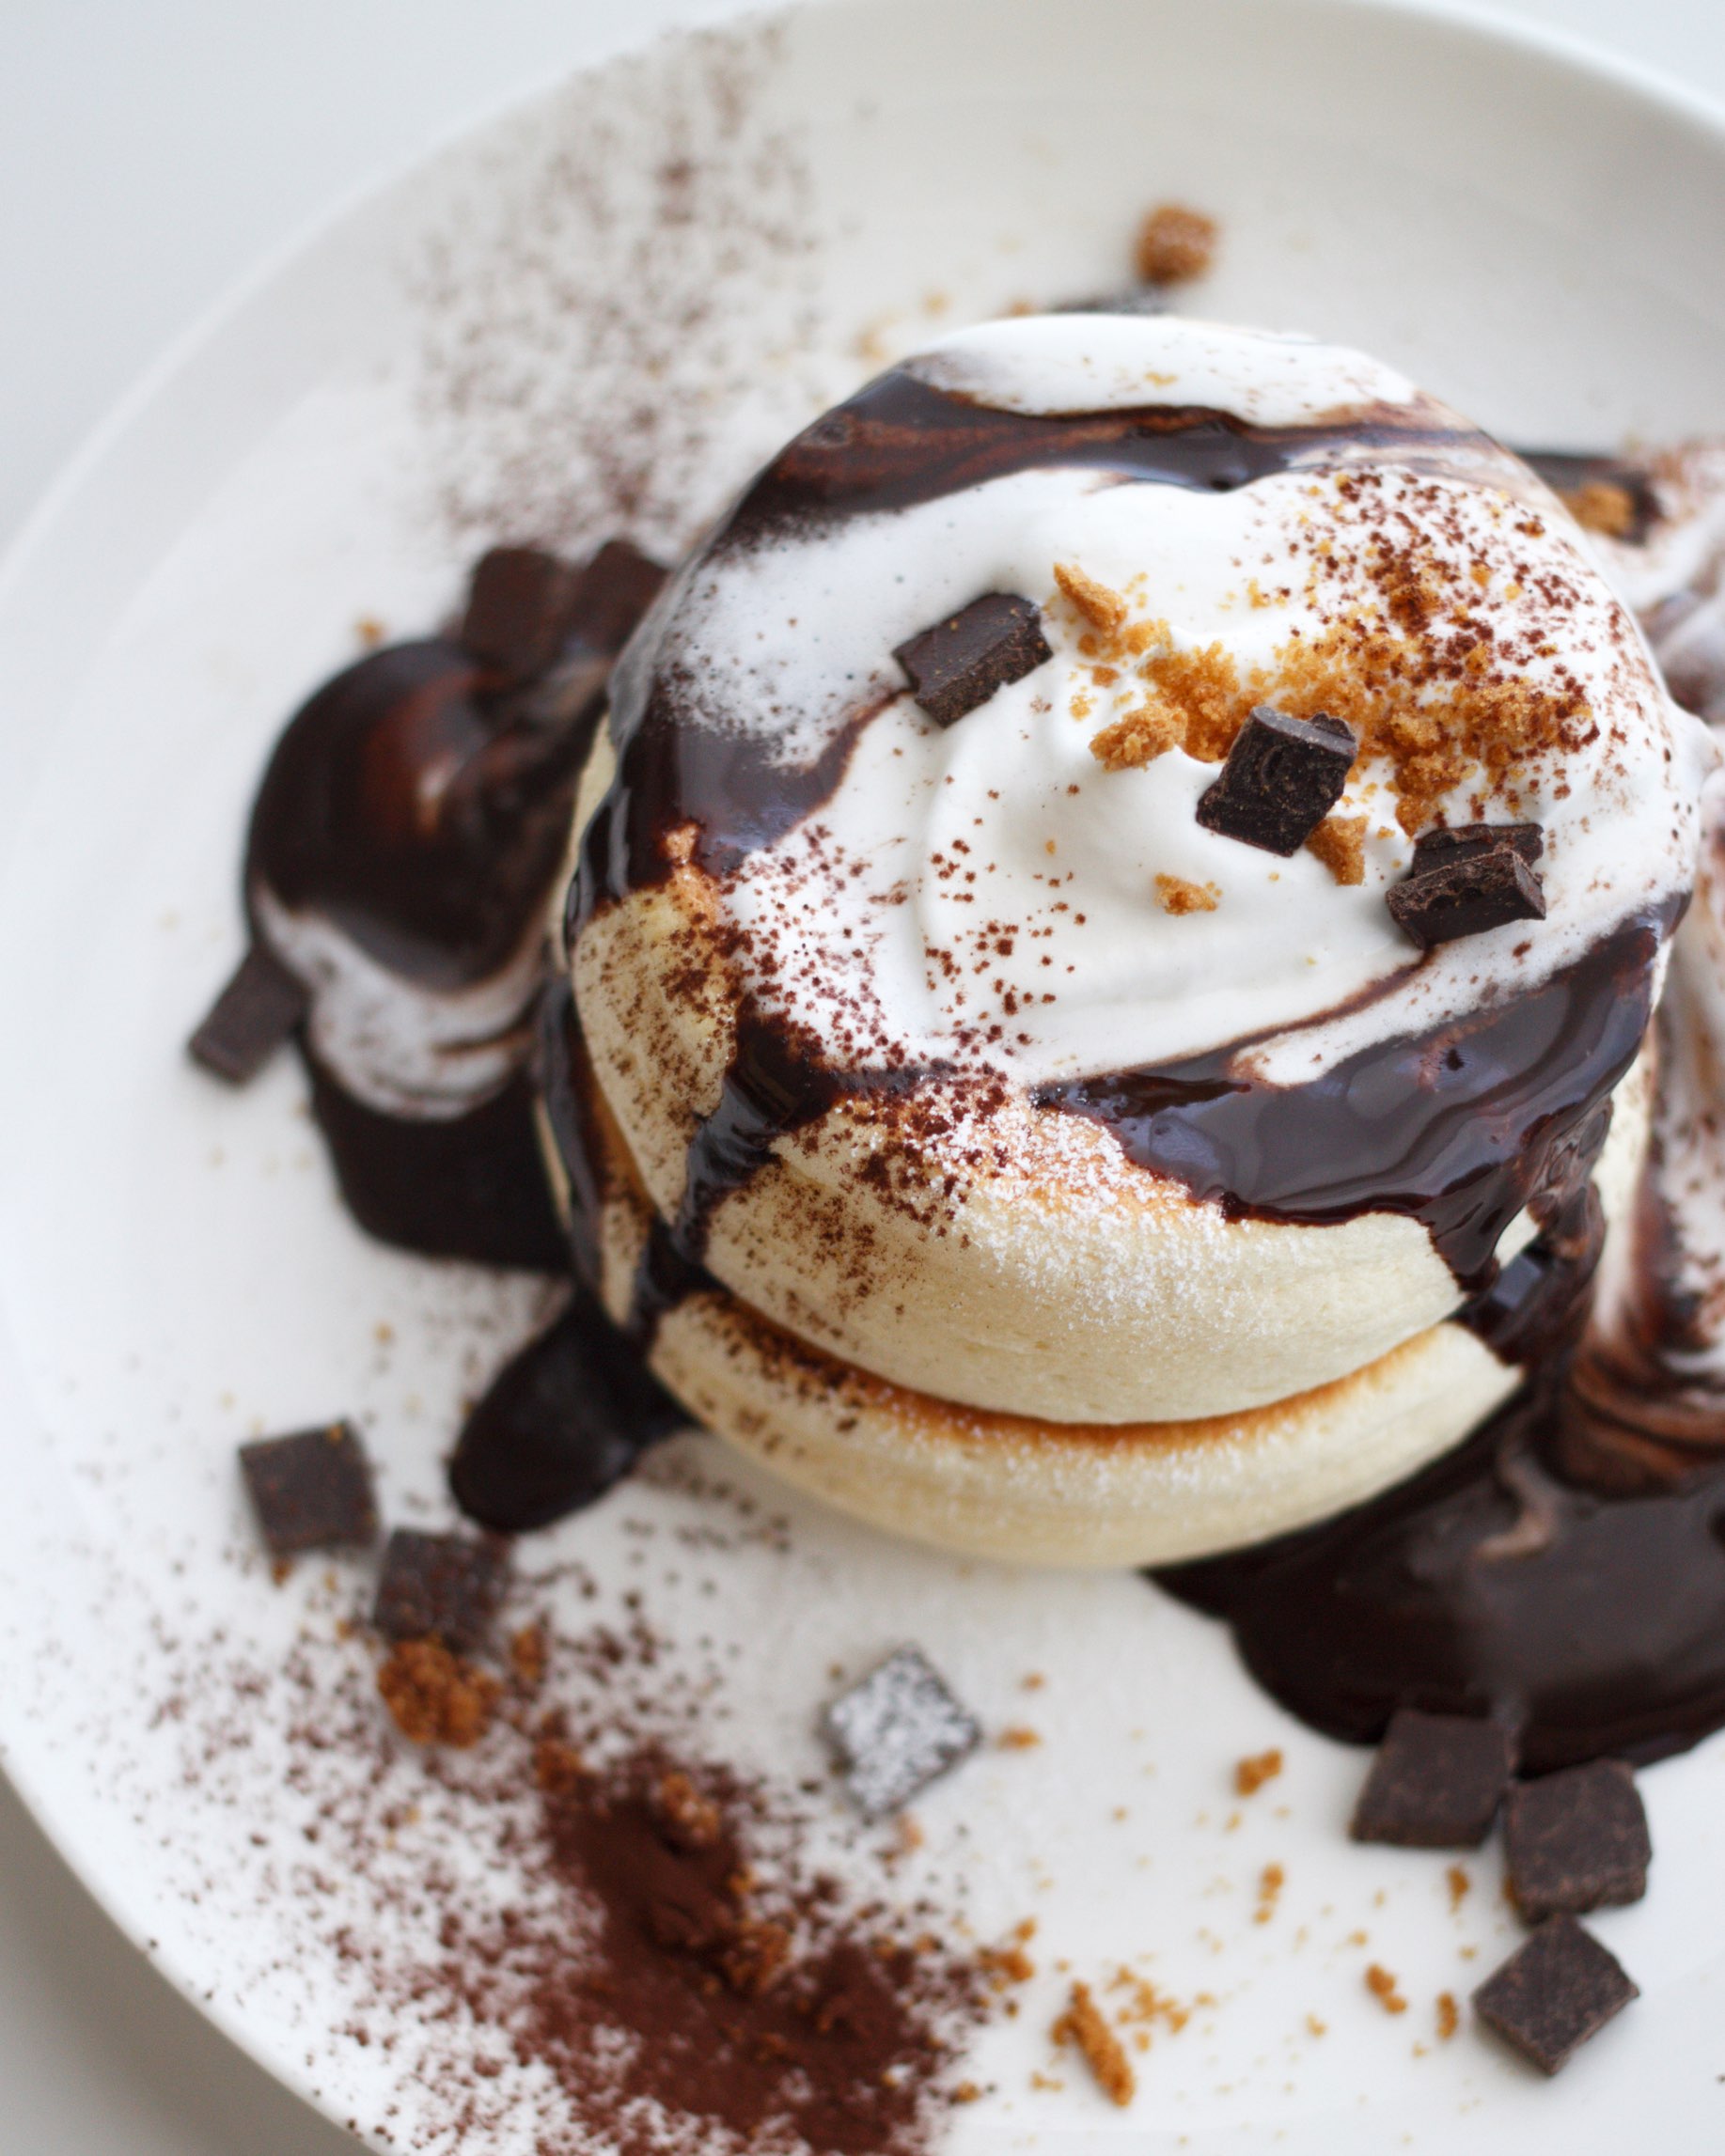 Japanese souffle pancakes with chocolate sauce – INDY ASSA